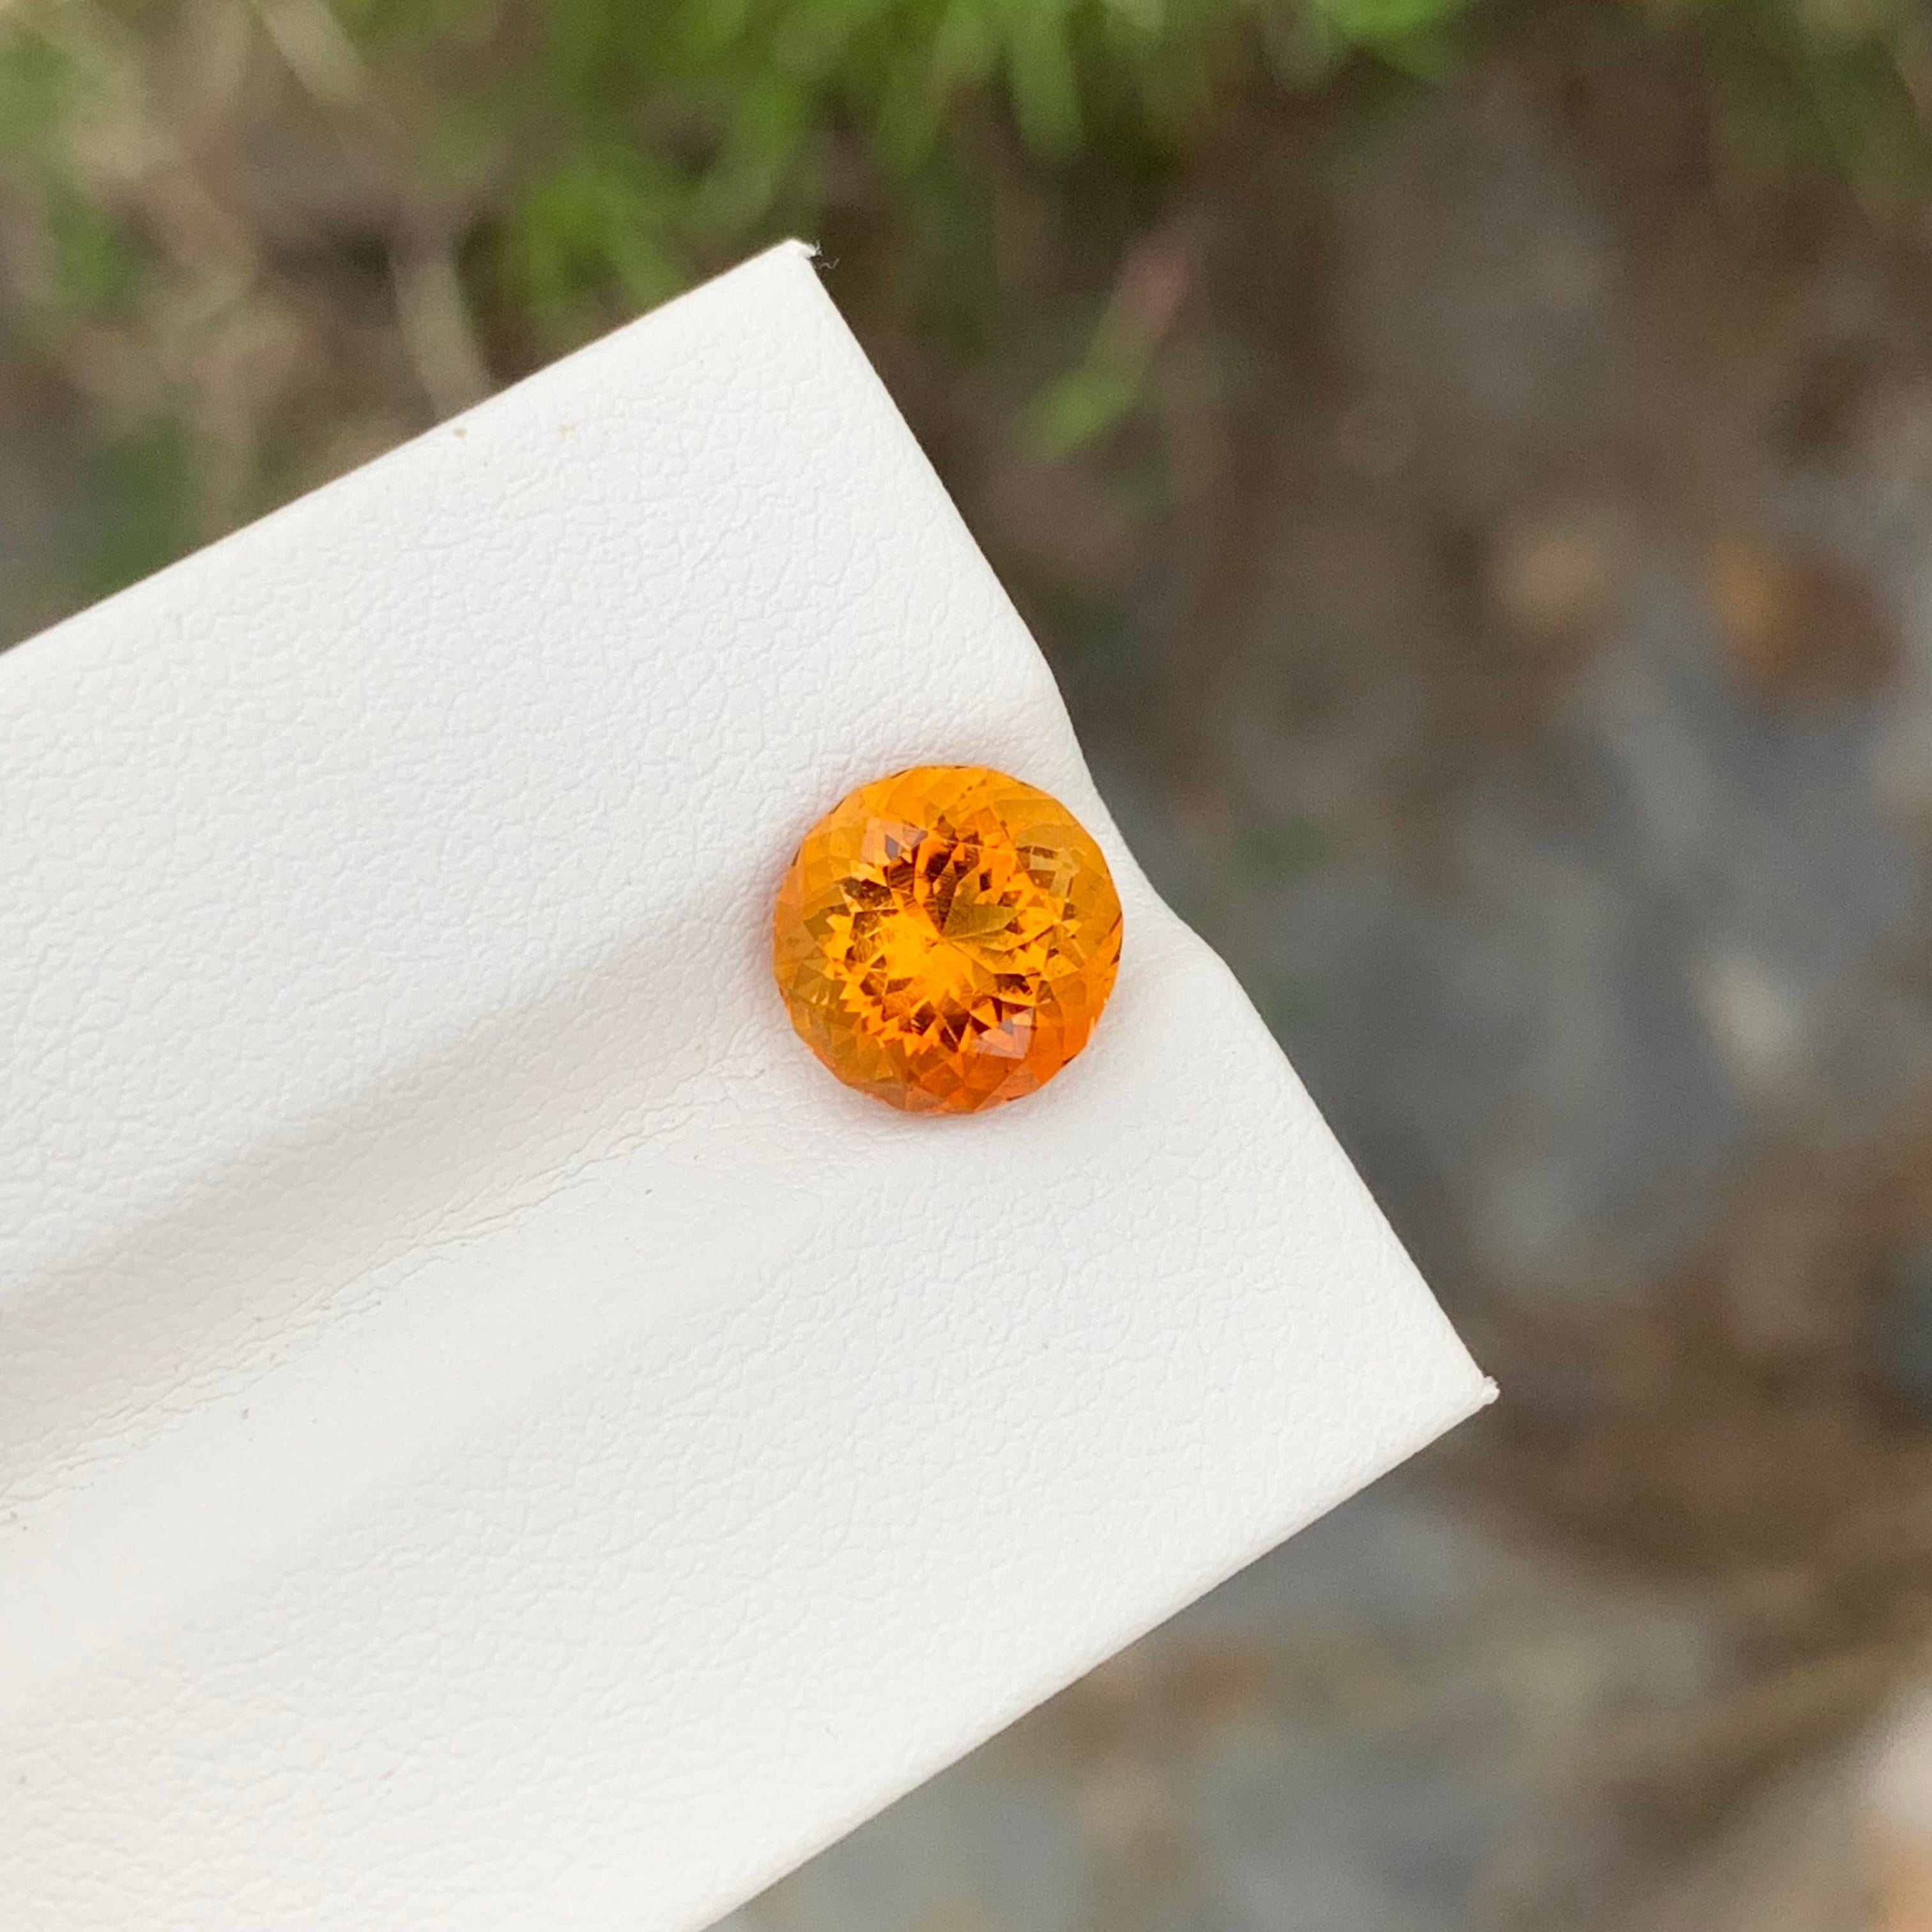 Loose Madeira Citrine
Weight: 2.40 Carats
Dimension: 8.4 x 8.4 x 6.1 Mm
Colour: Orange
Shape: Round 
Certificate: On Demand

Madeira citrine, a gemstone named after the rich and warm tones resembling the fortified wine from the Madeira region of